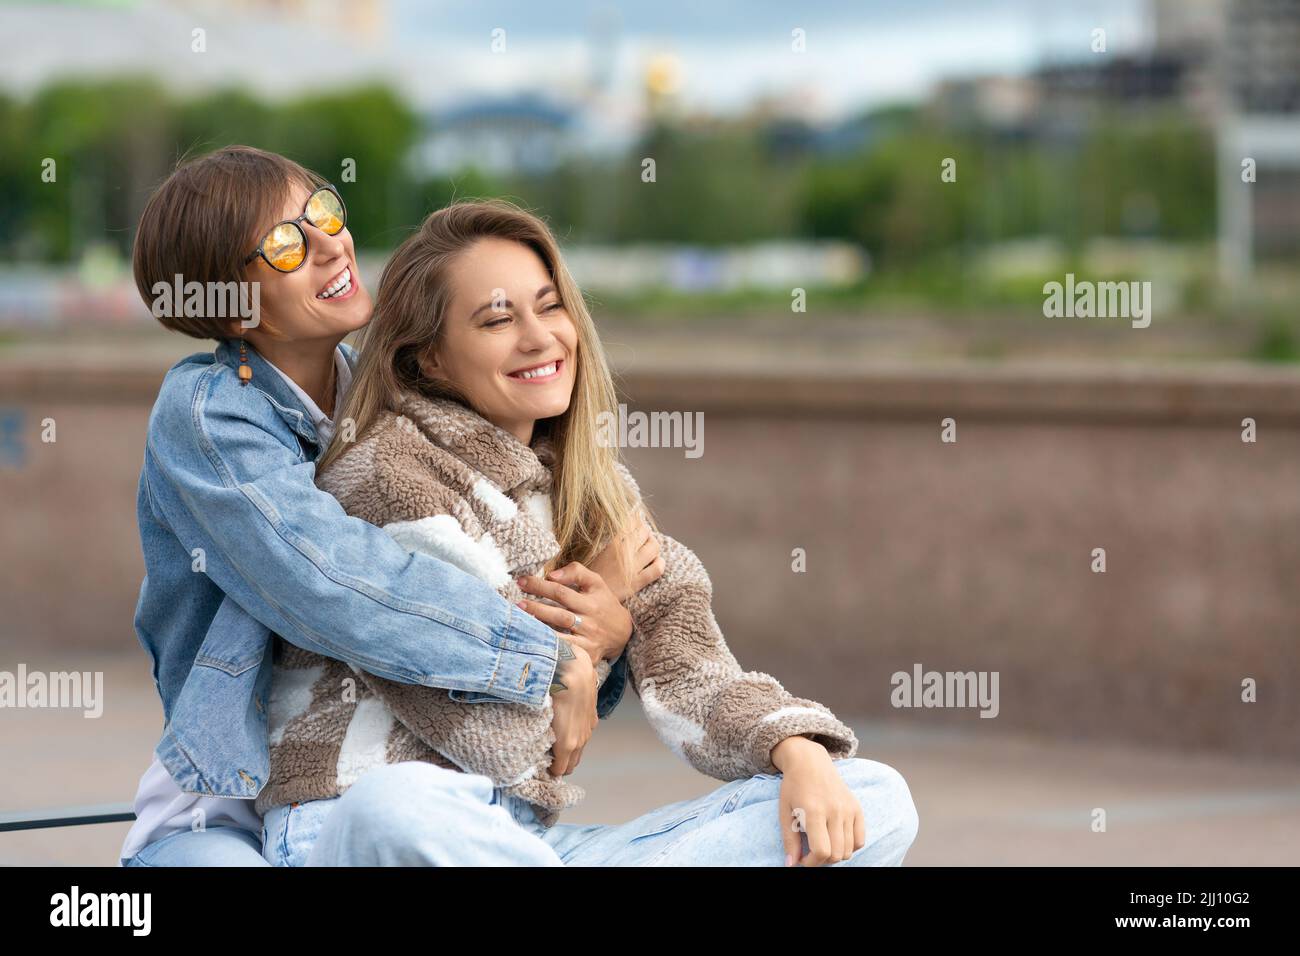 Love and relationships concept. Lesbian couple during outdoor walking. Beautiful romantic moment between two female lovers. Stock Photo